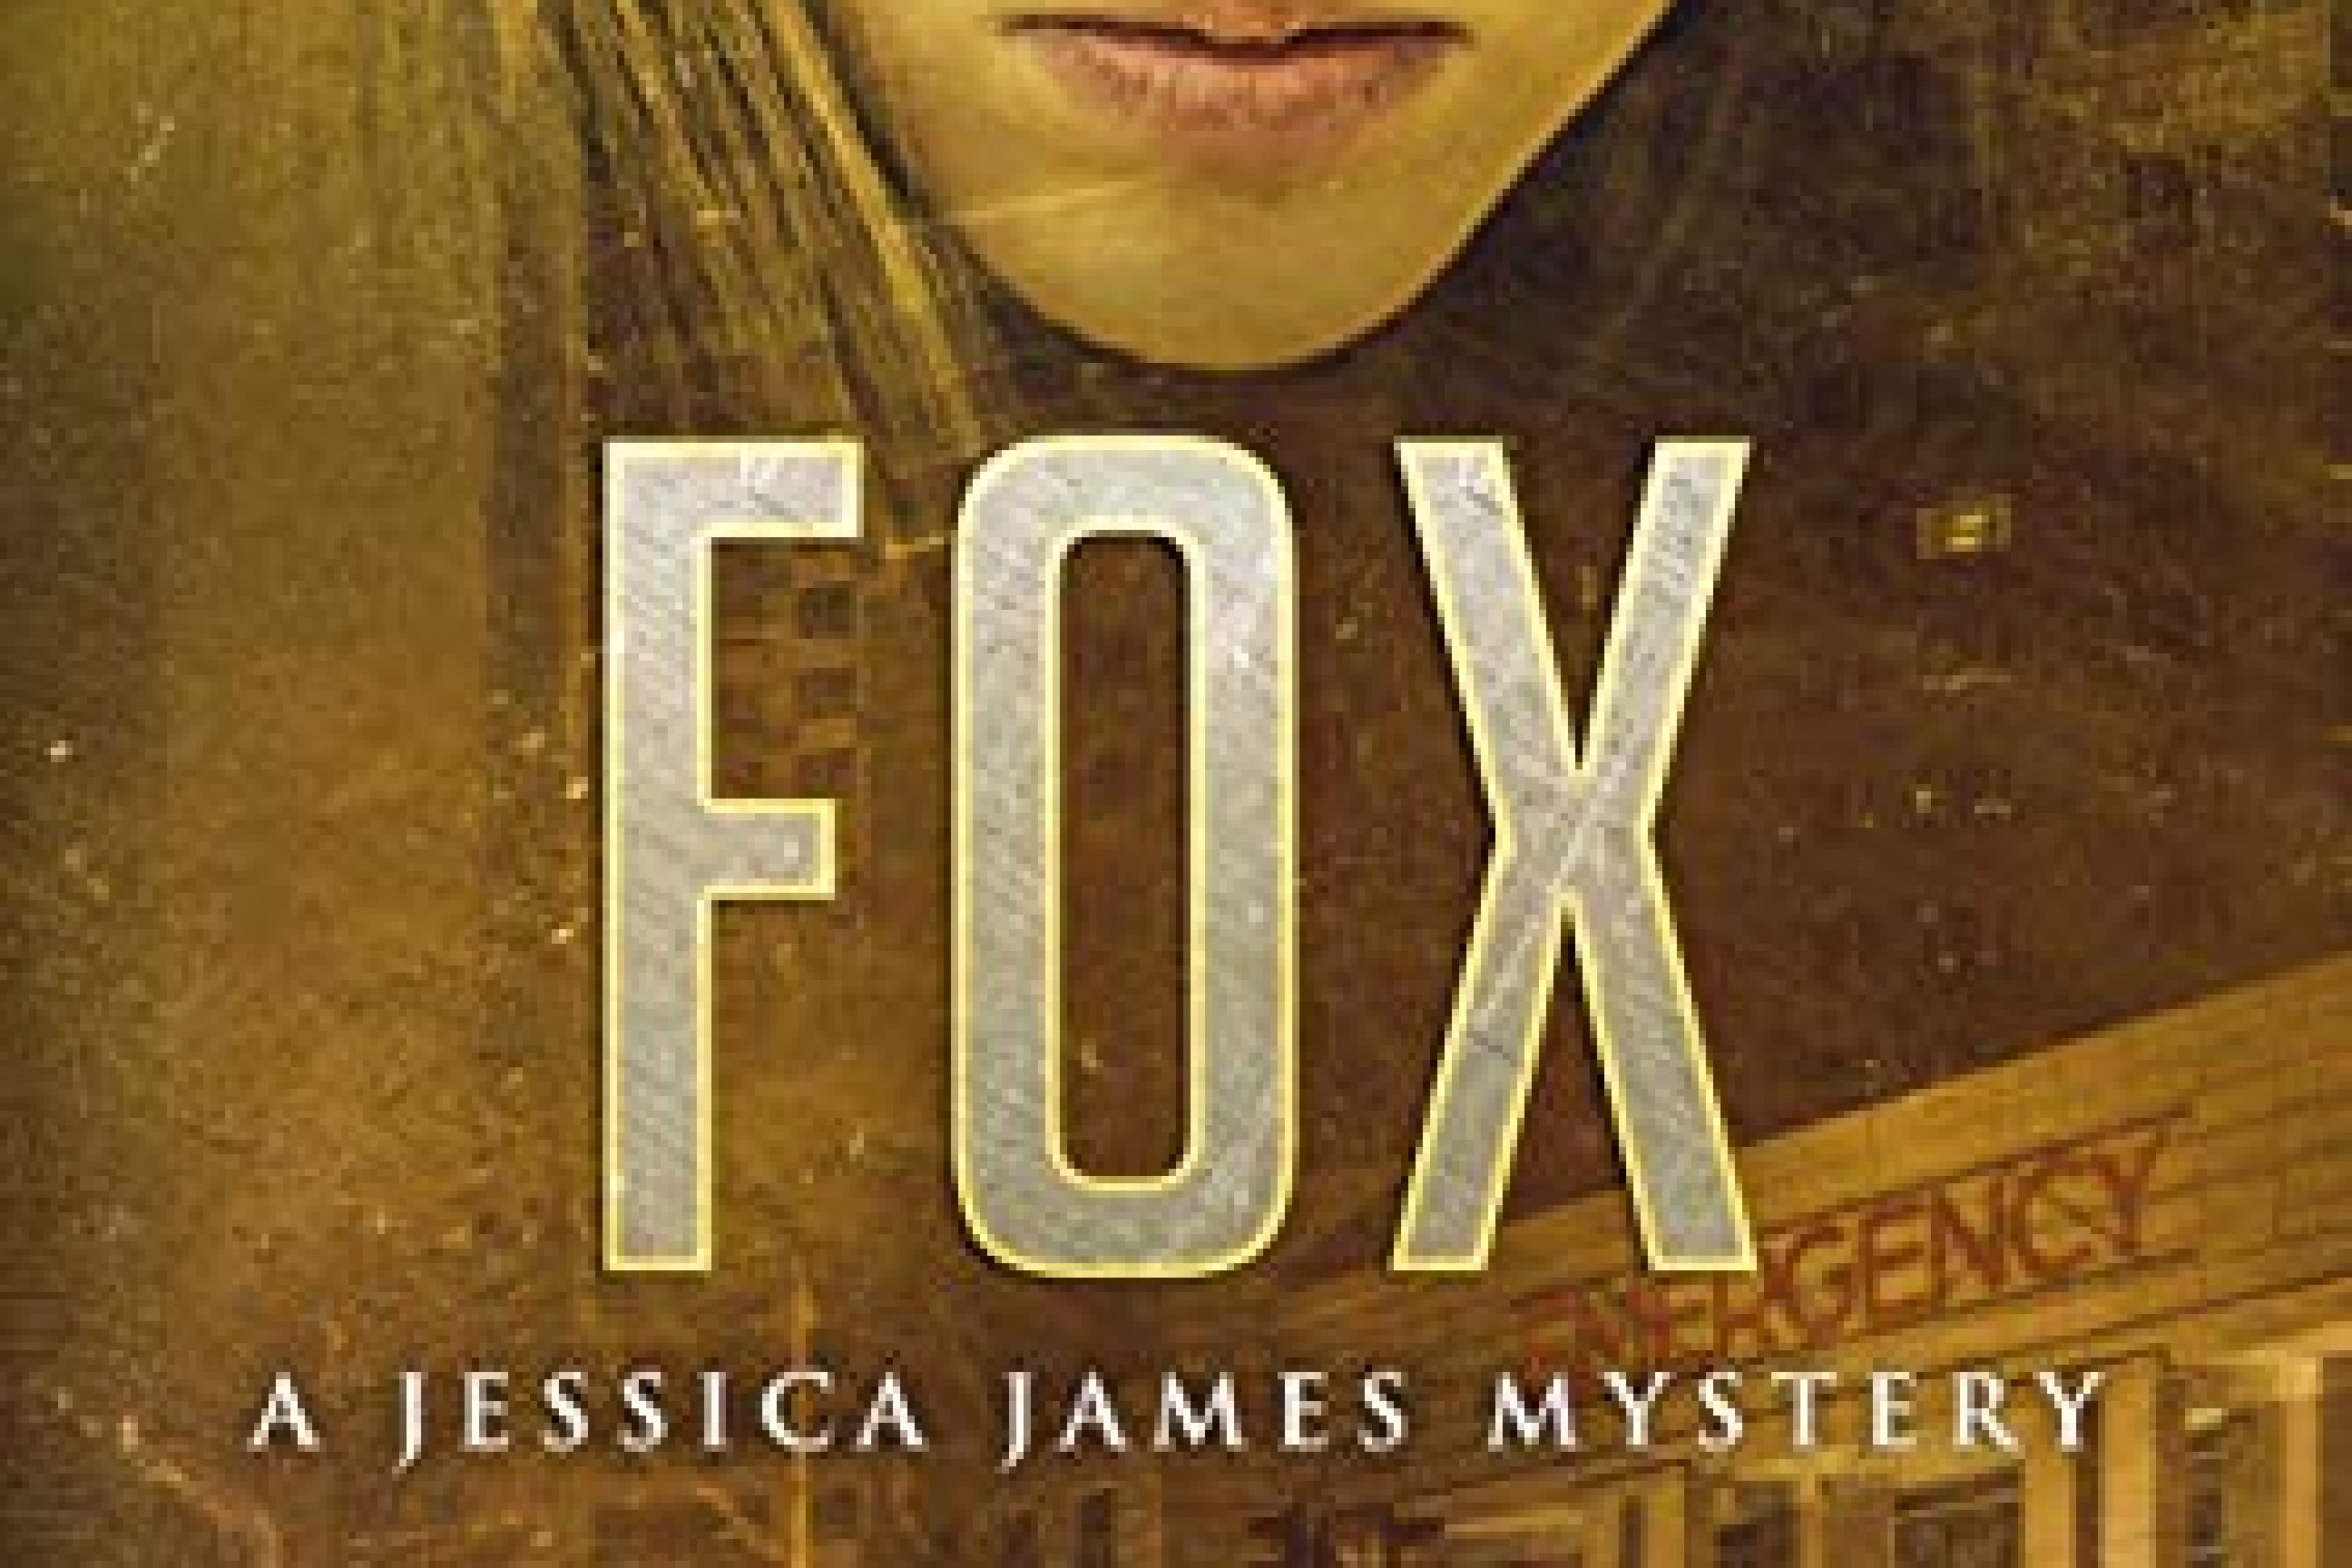 DNF: FOX (Jessica James #3) by Kelly Oliver